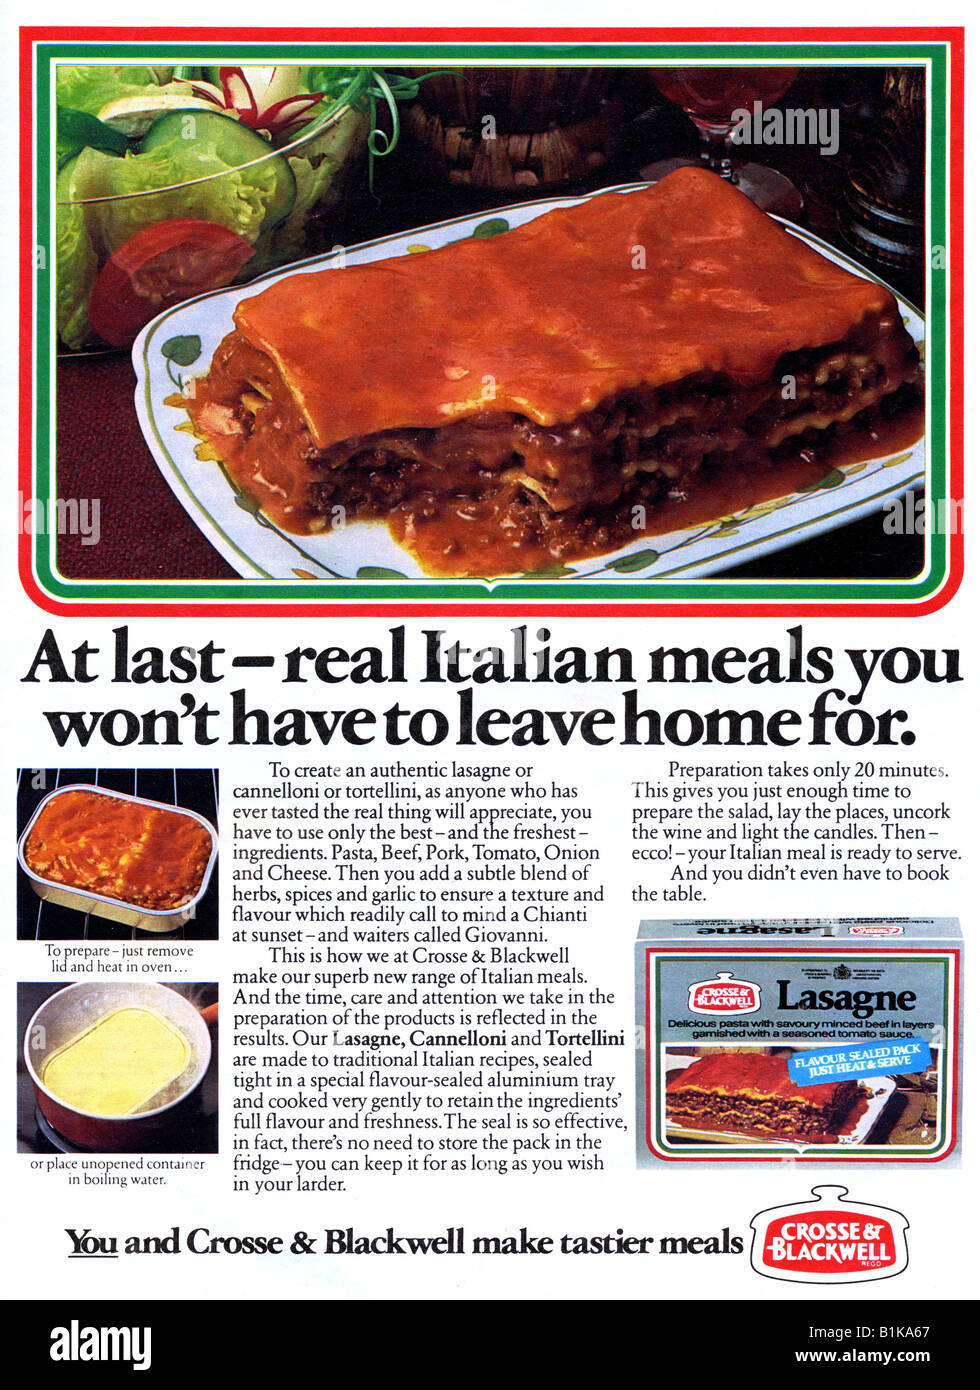 1980 advertisement for Crosse & Blackwell Italian Meals FOR EDITORIAL USE ONLY Stock Photo